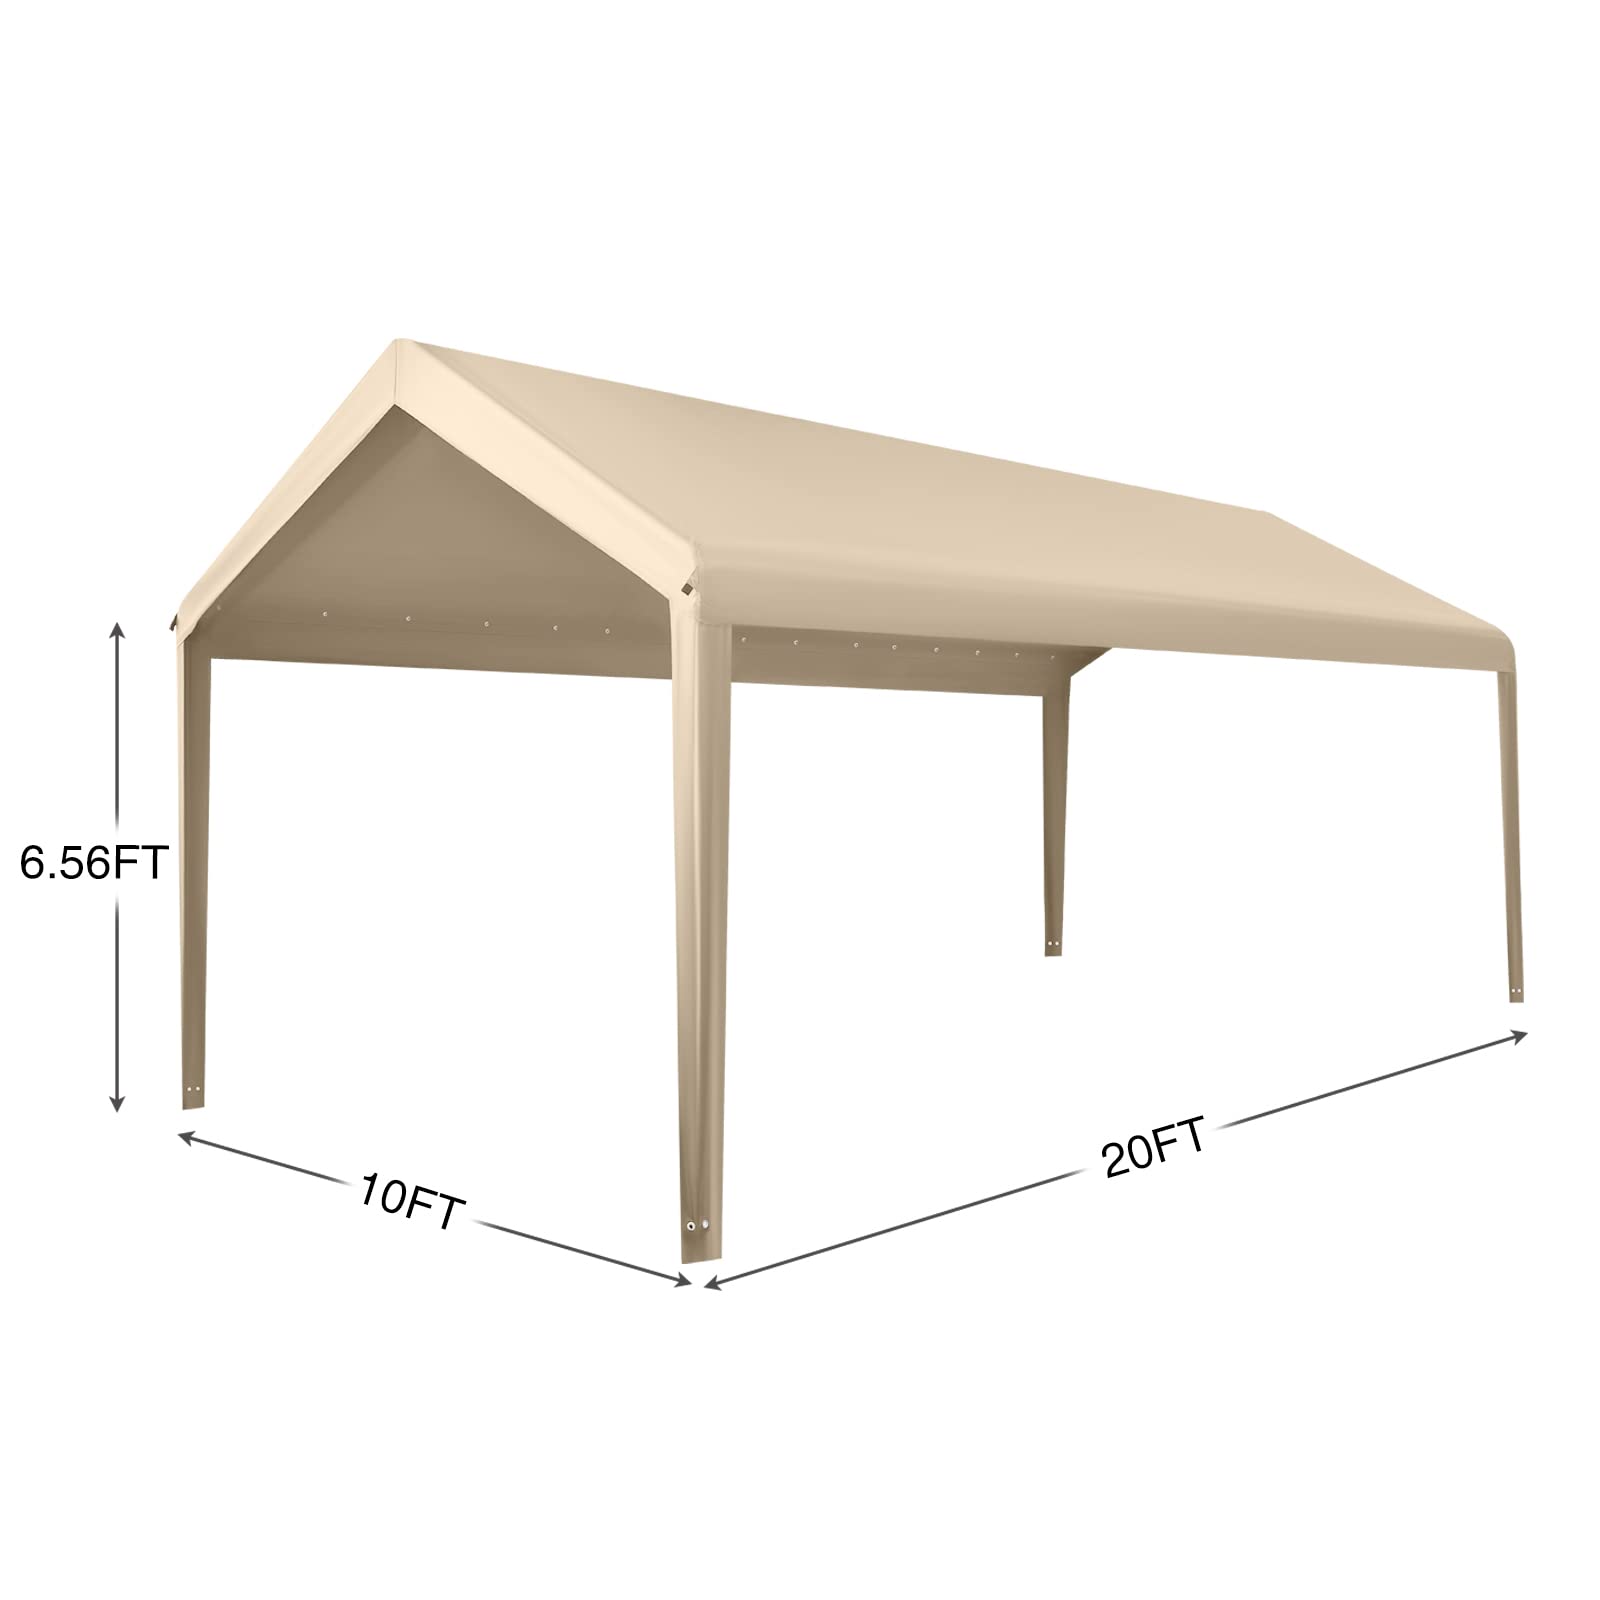 Gardesol Replacement Canopy, Replacement Top Cover for 10' x 20' Carport Frame, 180G Waterproof & UV Protected Tarp with Ball Bungees, Beige,